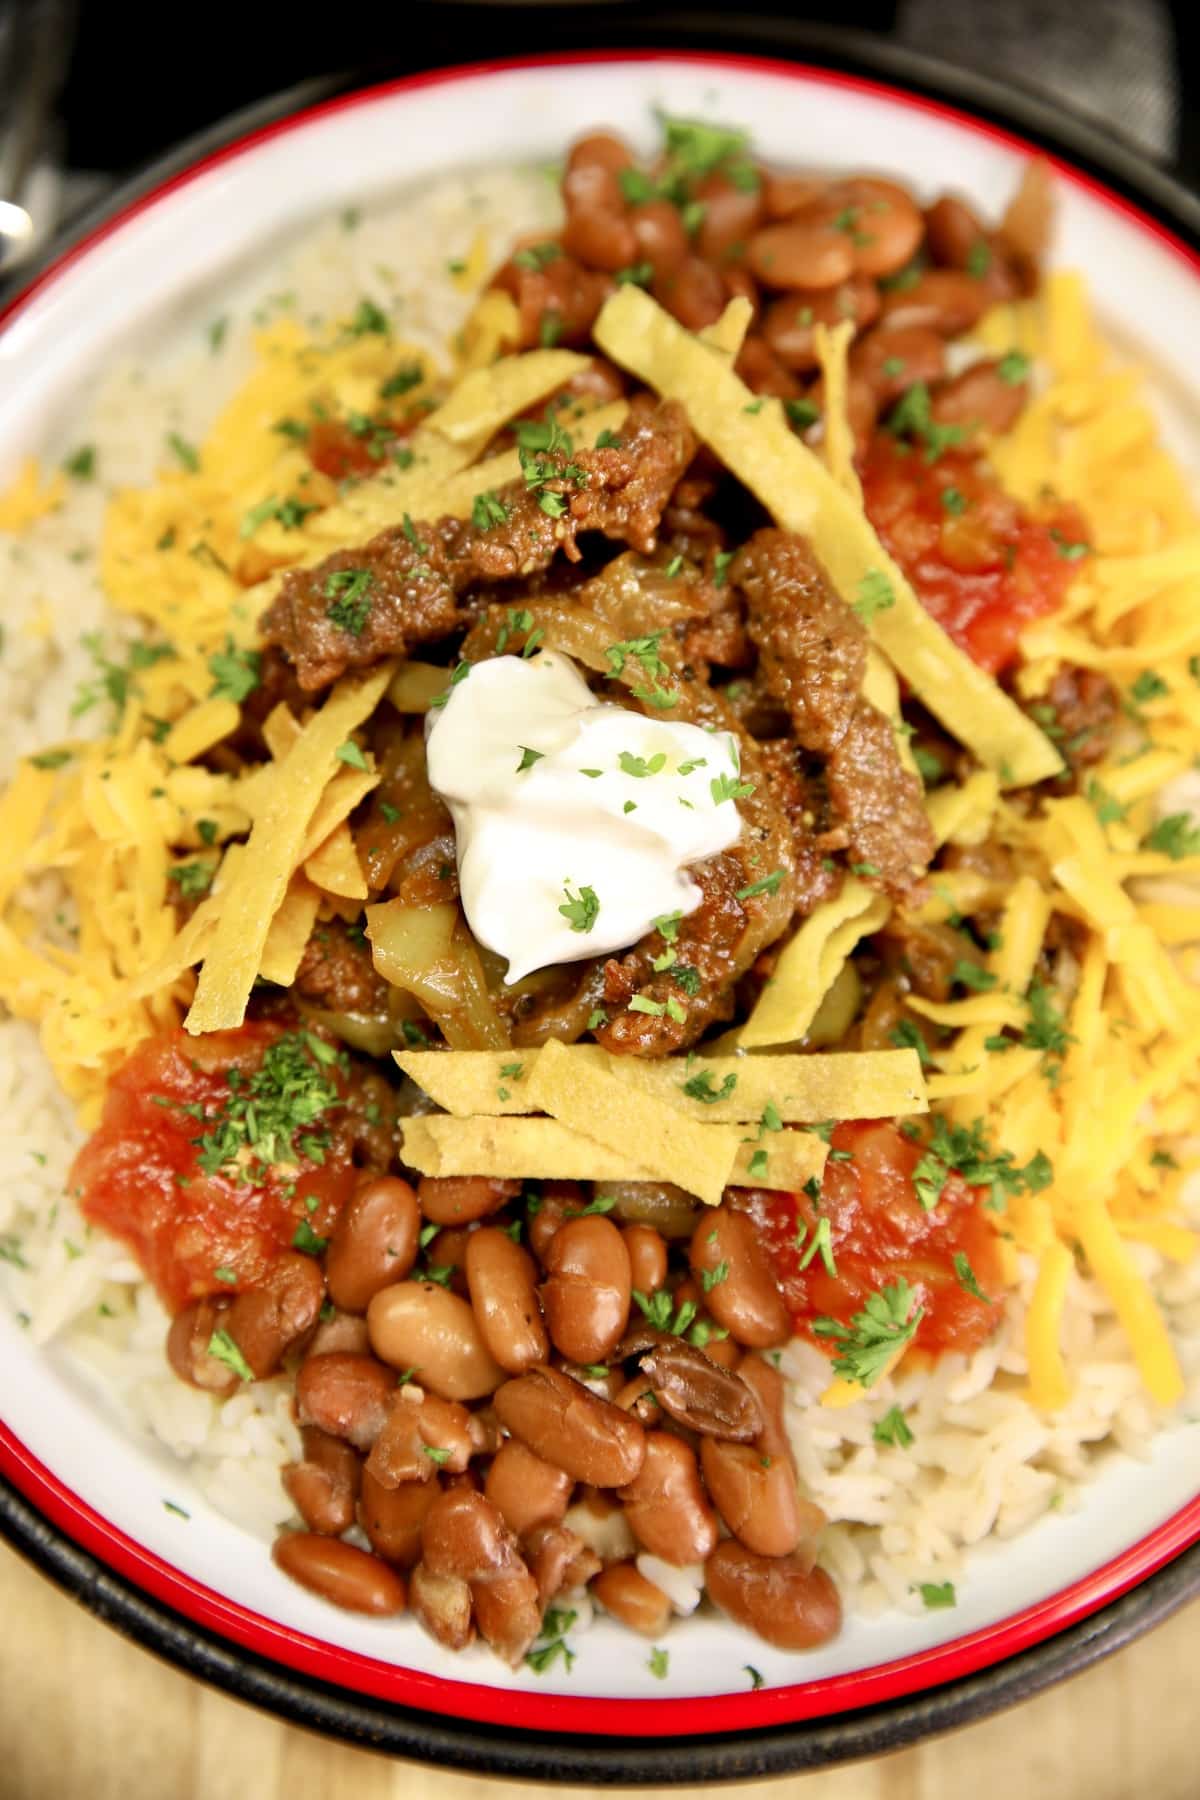 Carne asada bowls with steak, beans, rice and toppings.